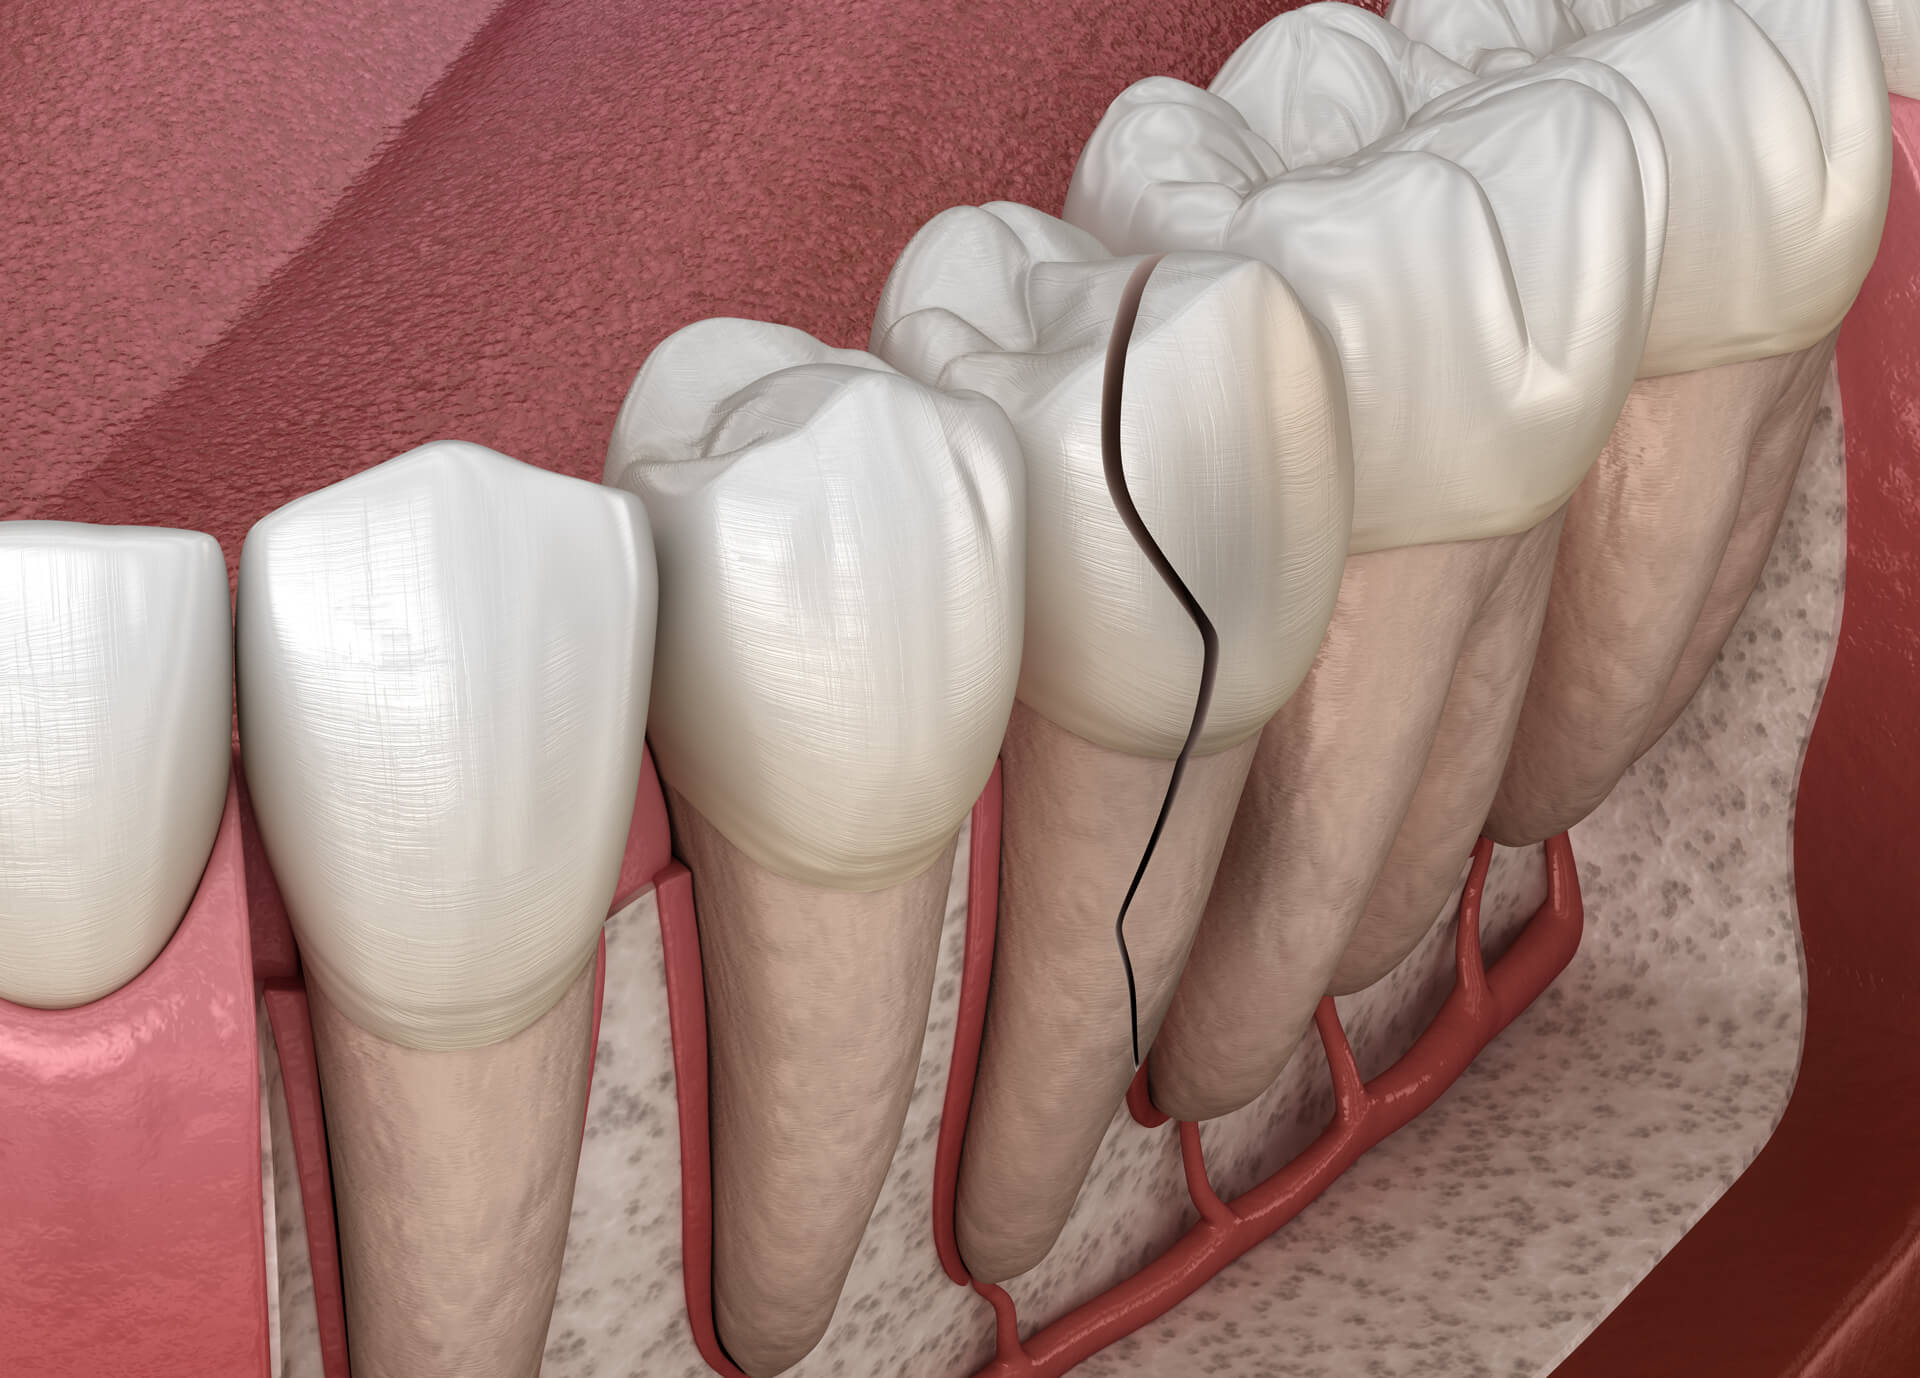 143vpn cracked tooth